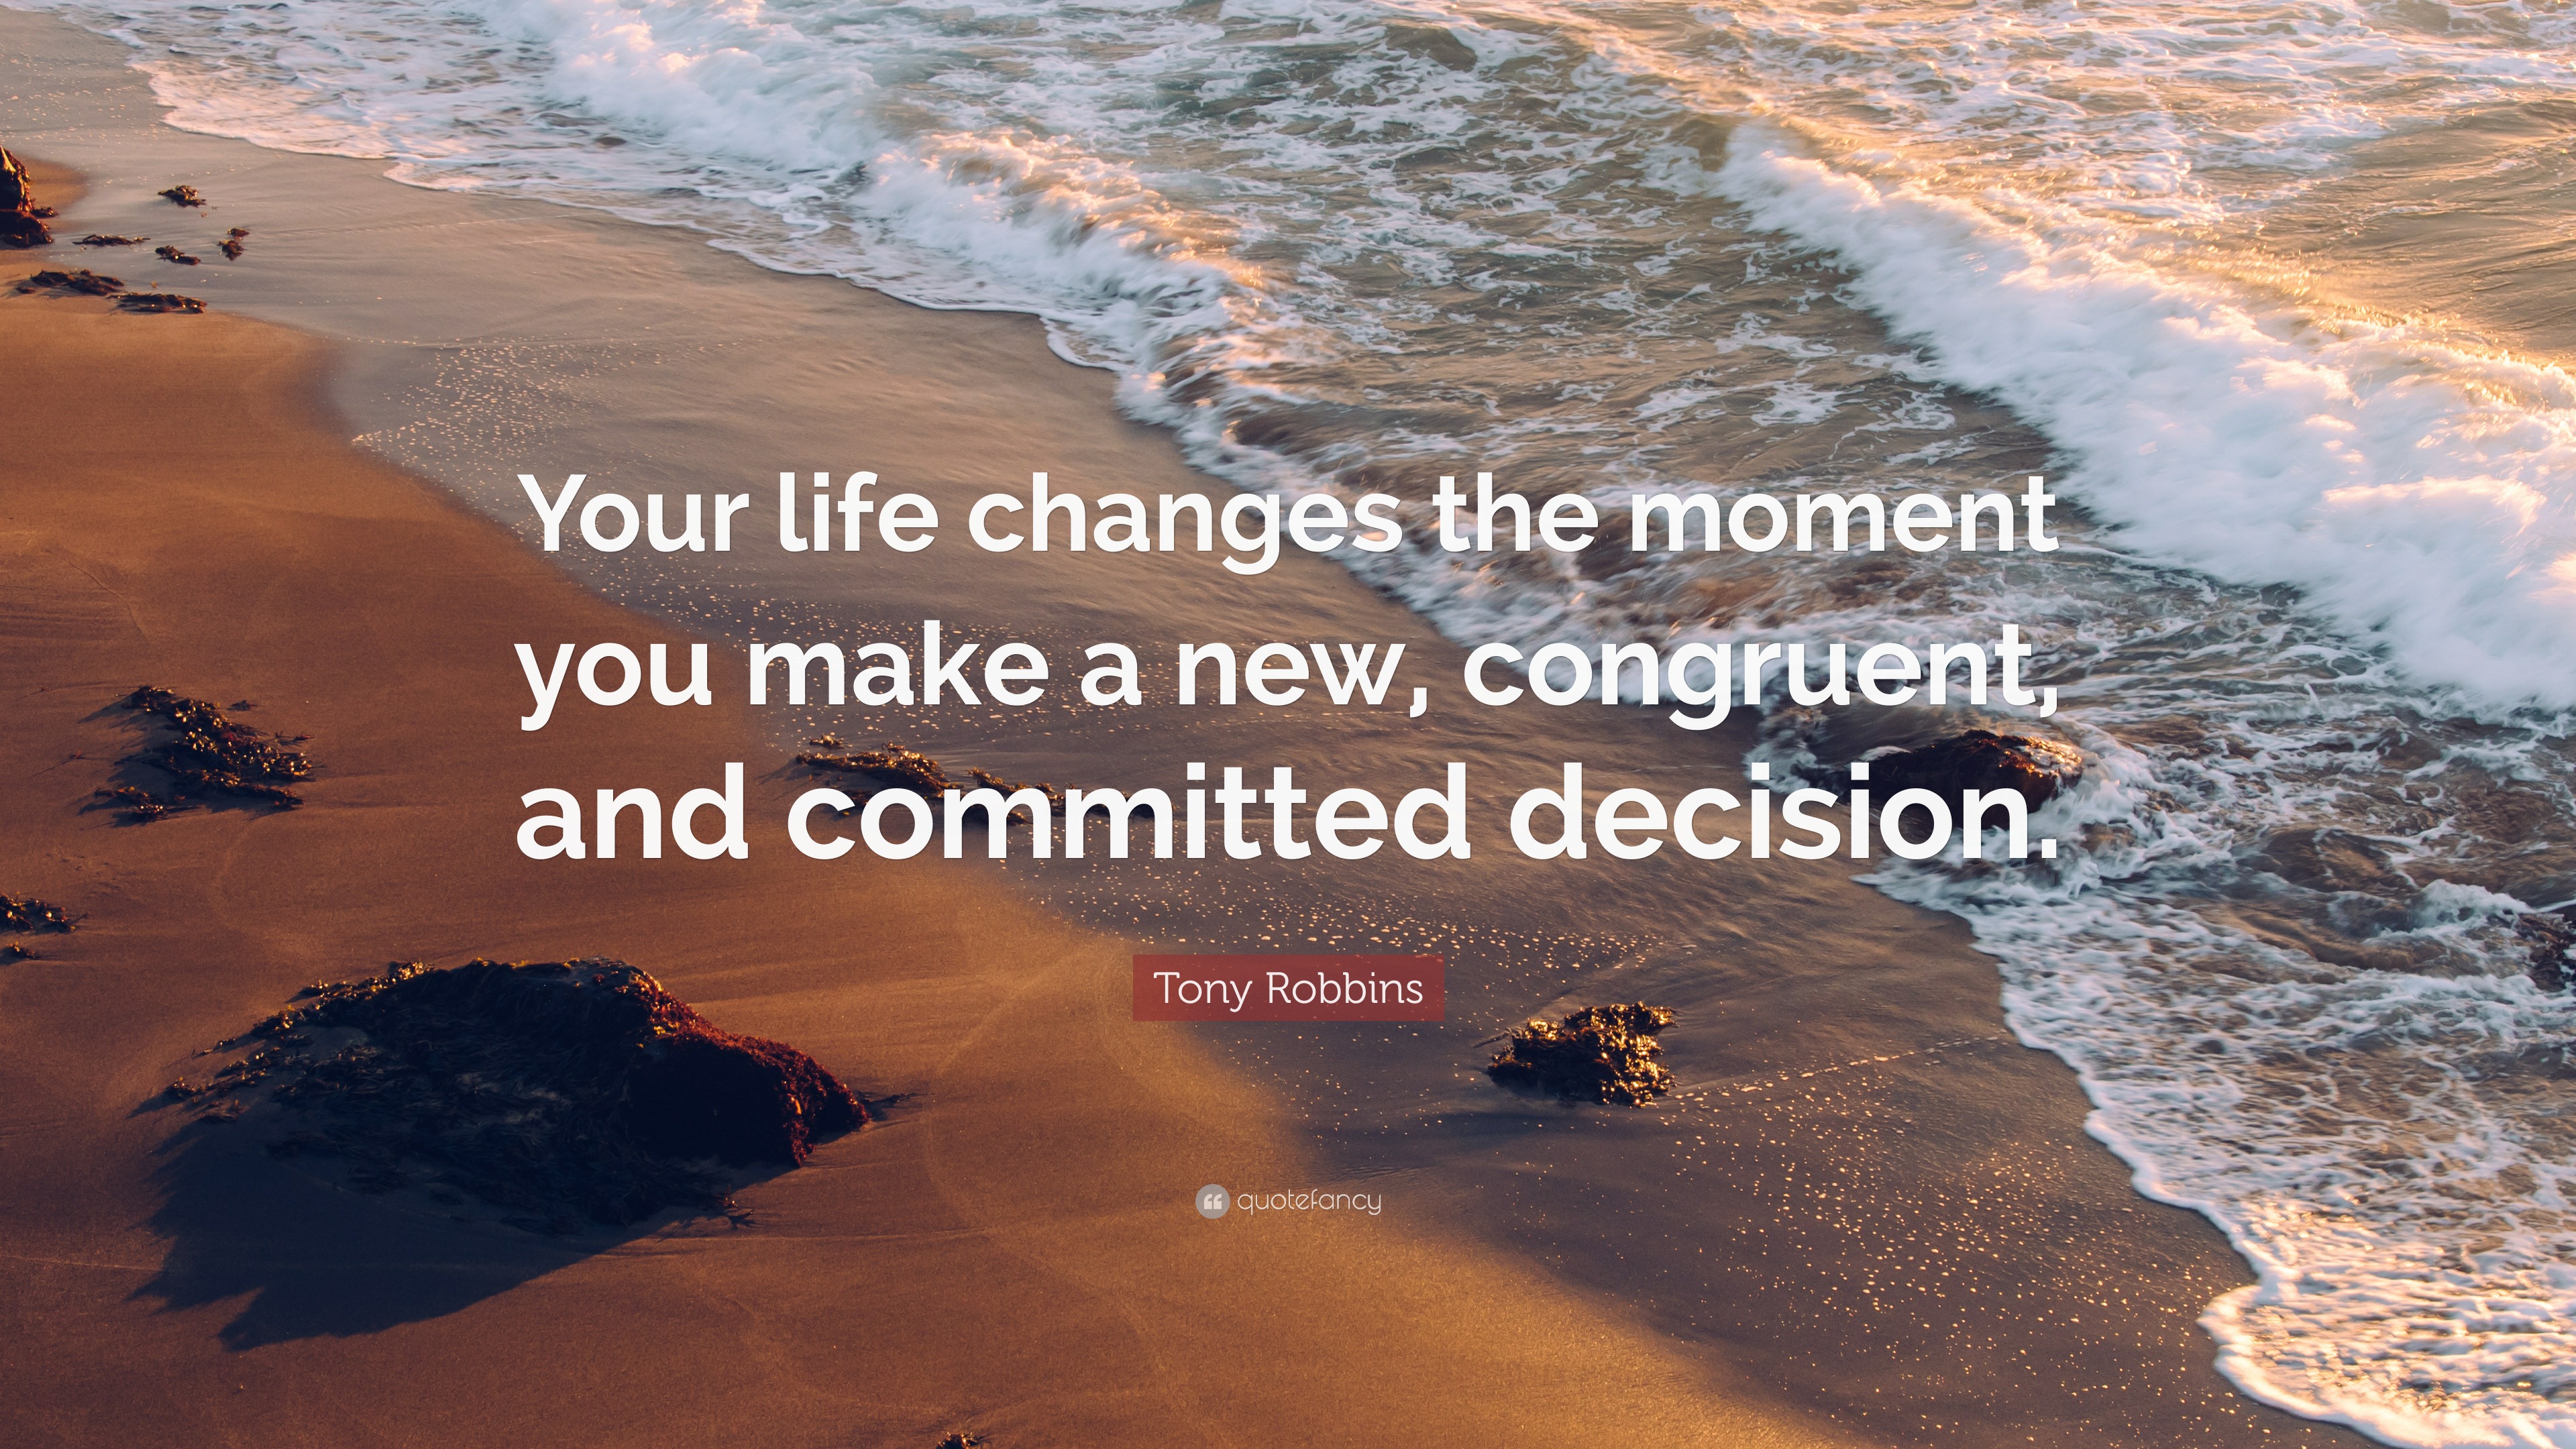 inspirational life changes quotes